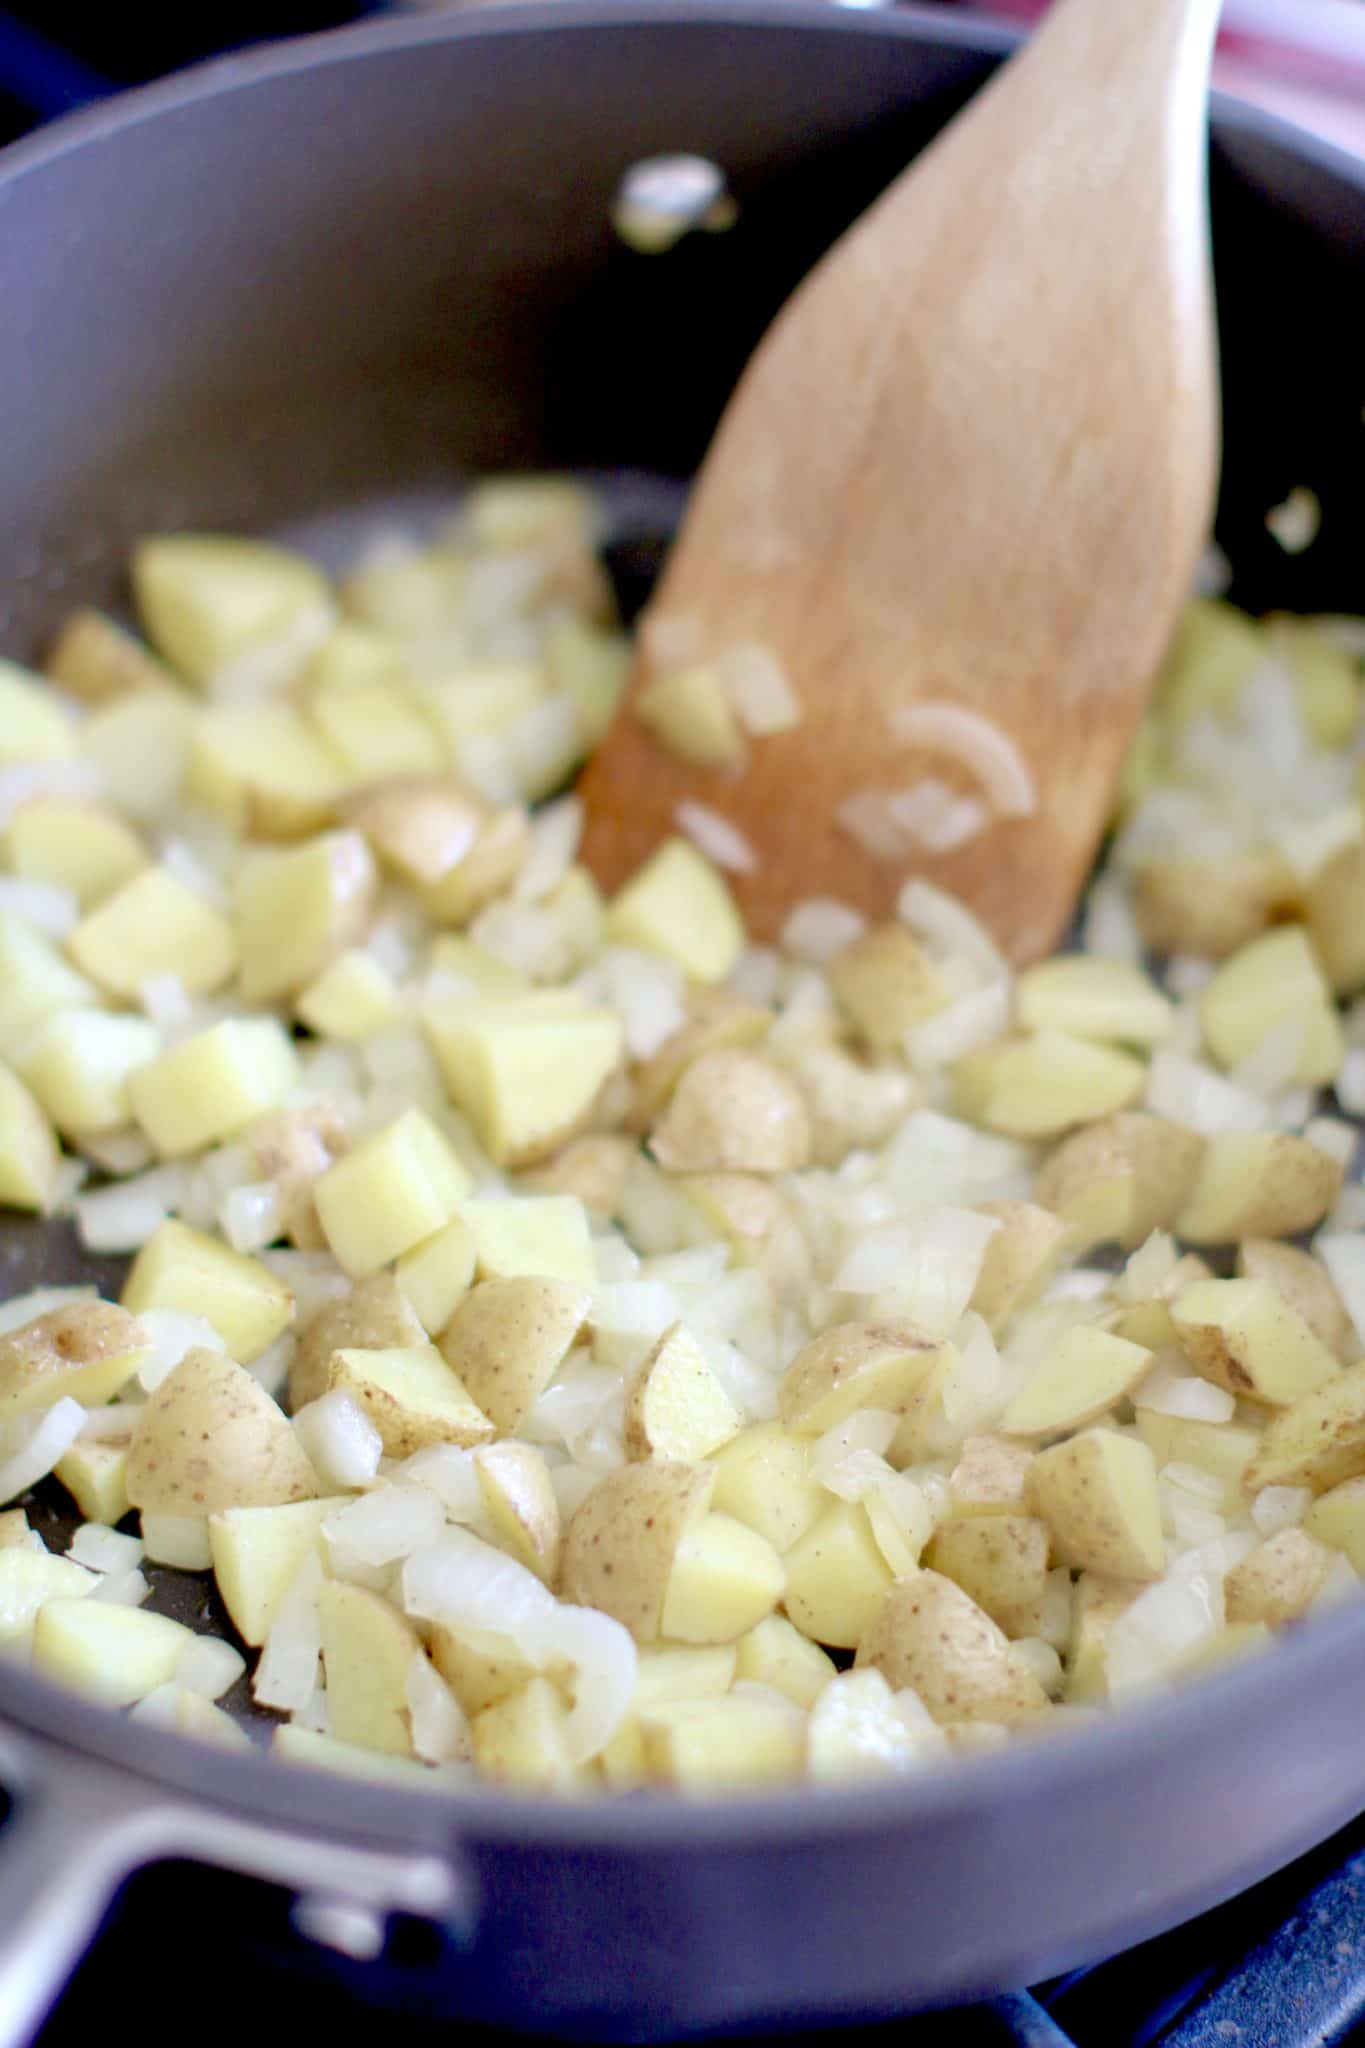 diced potatoes and onions in a skillet with a wooden spatula.